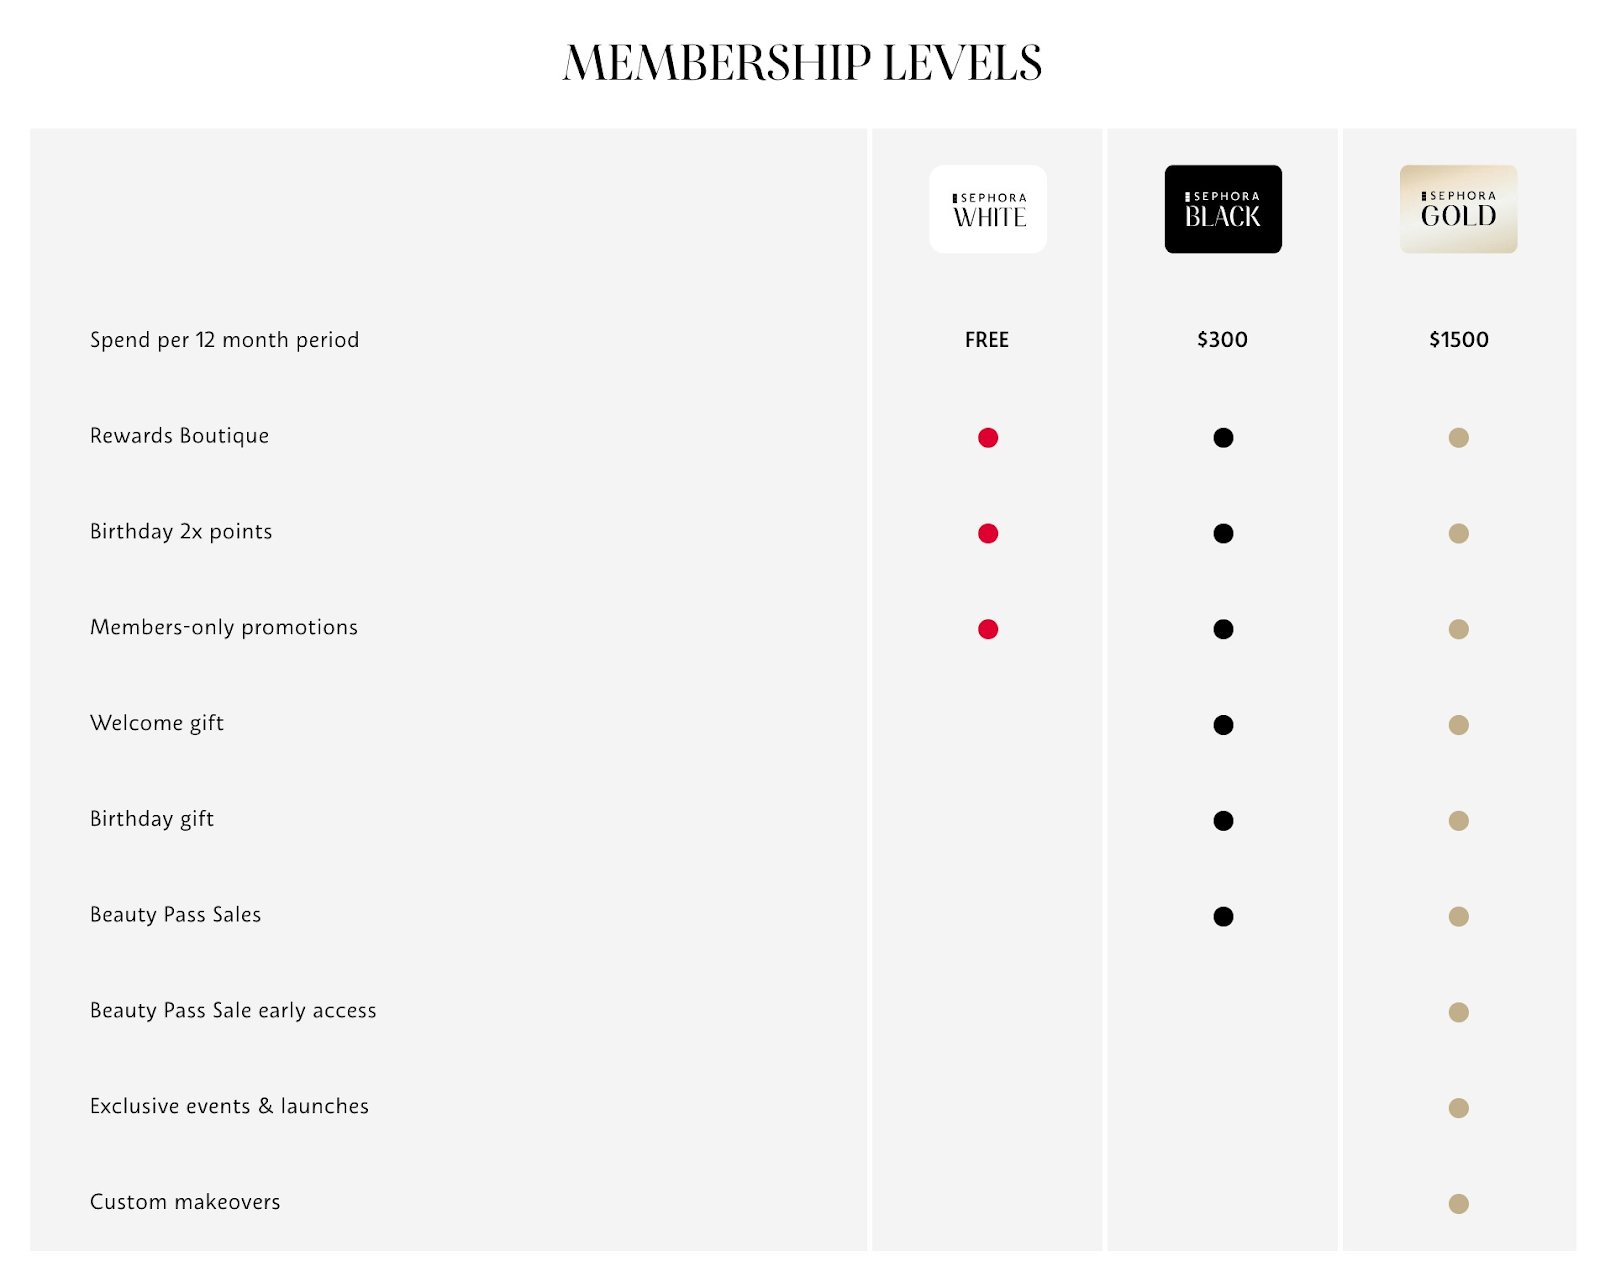 Table showing perks that Sephora customers can get when they unlock the various membership levels 